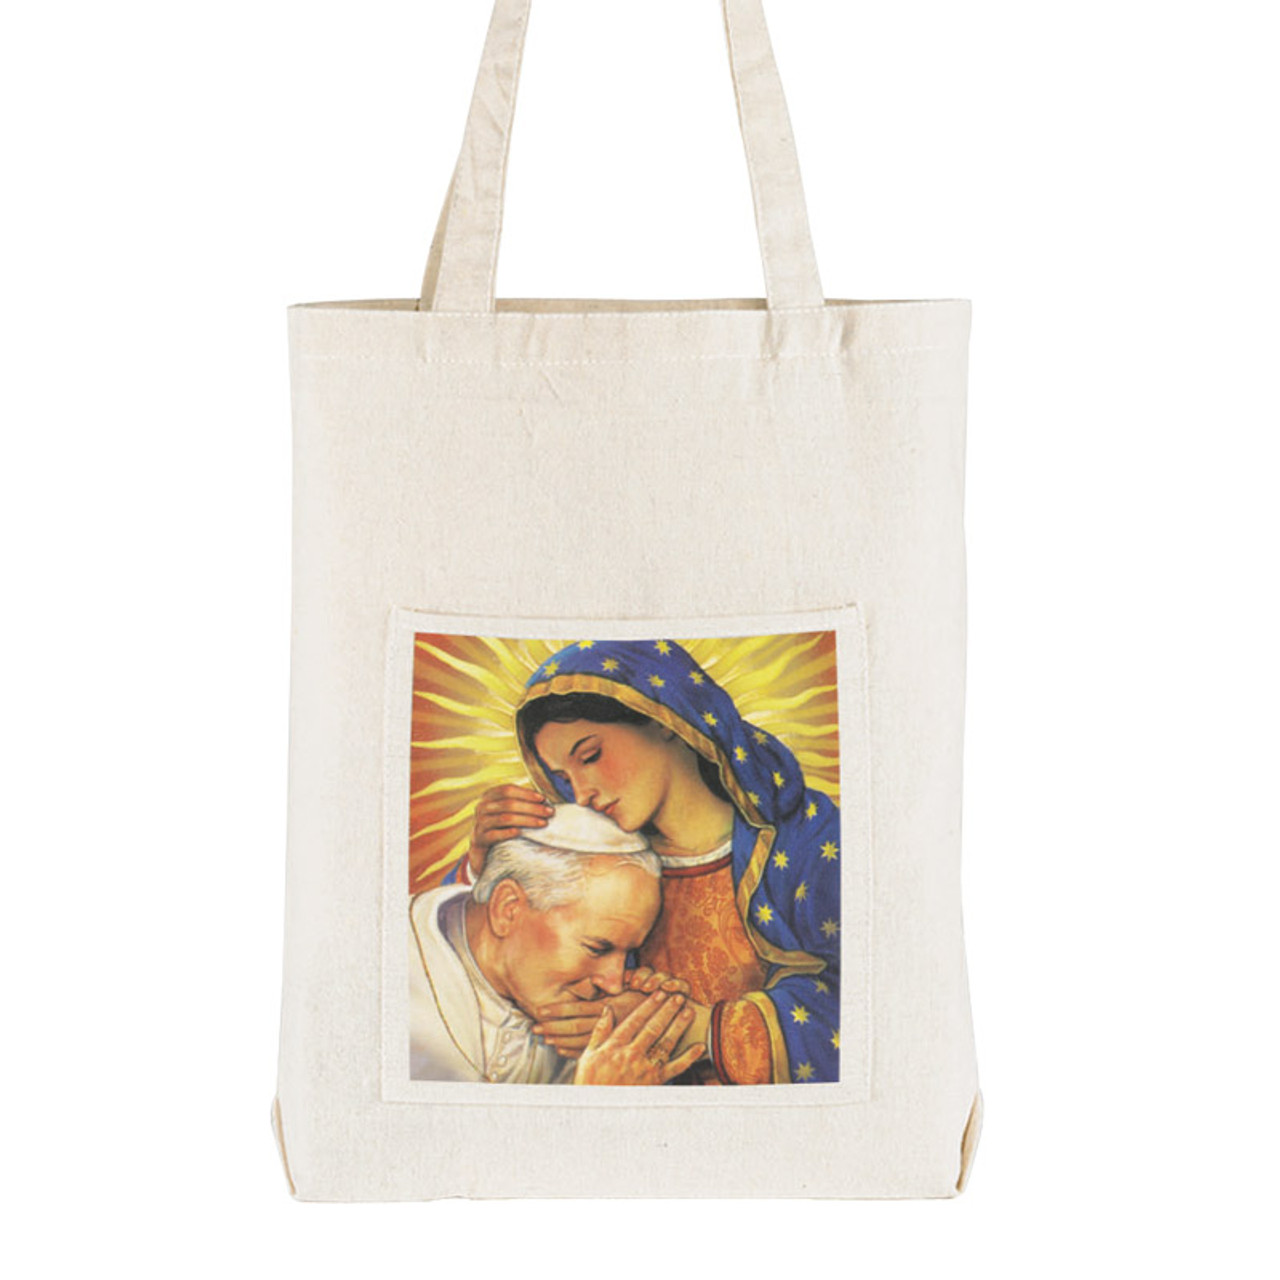 Pope Saint John Paul II with Our Lady of Guadalupe tote bag